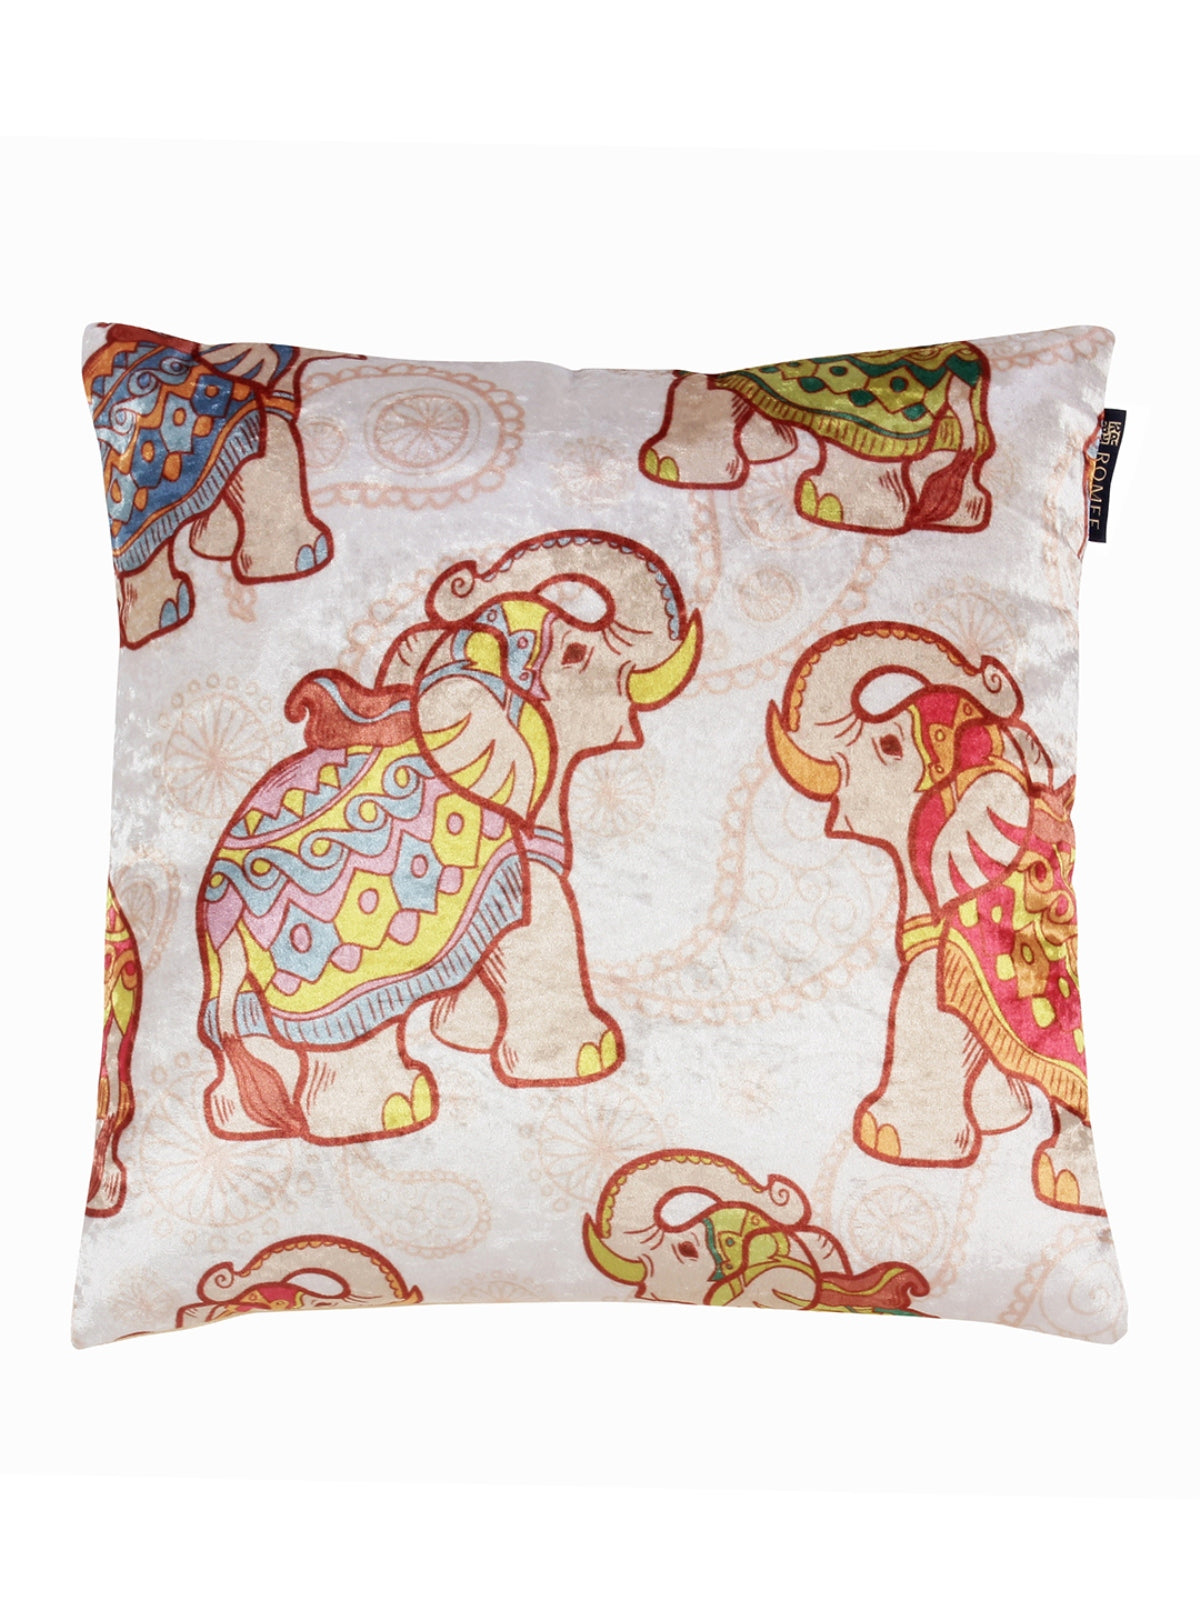 Soft Velvet Elephant Animal Print Throw Pillow/Cushion Covers Set of 5, 16x16 inches - Multicolor